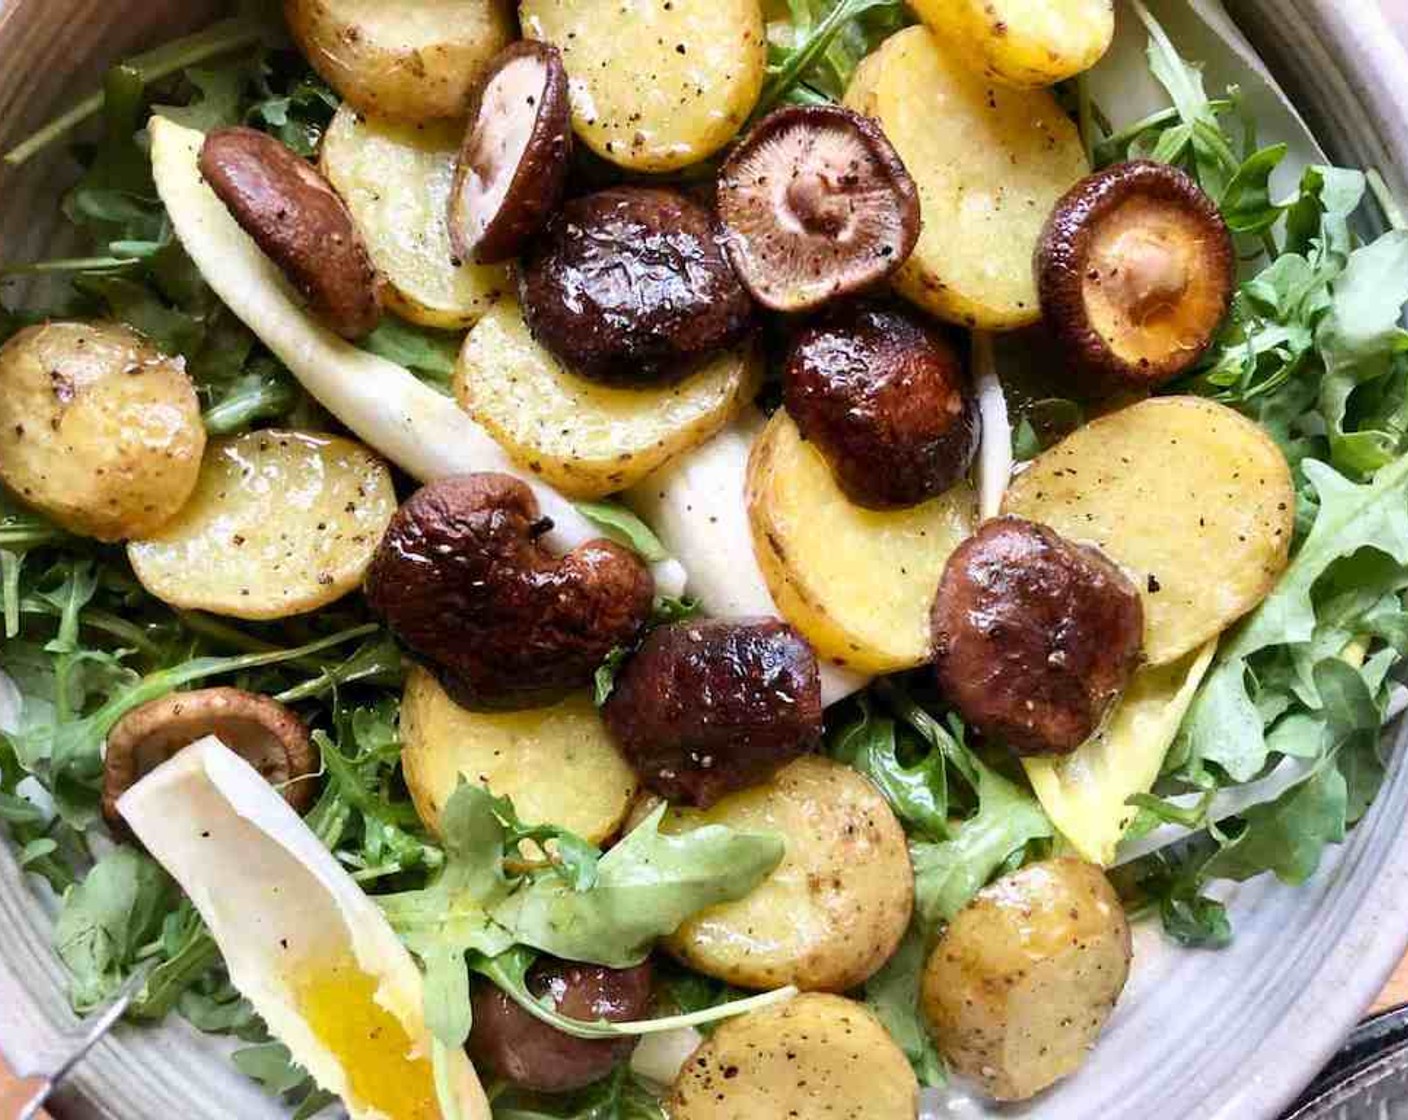 step 11 Just before serving, build the individual salads. Place the potatoes, mushrooms, Baby Arugula (2 cups), and White Belgian Endive (2 heads) in a large bowl and drizzle some vinaigrette over the combo.